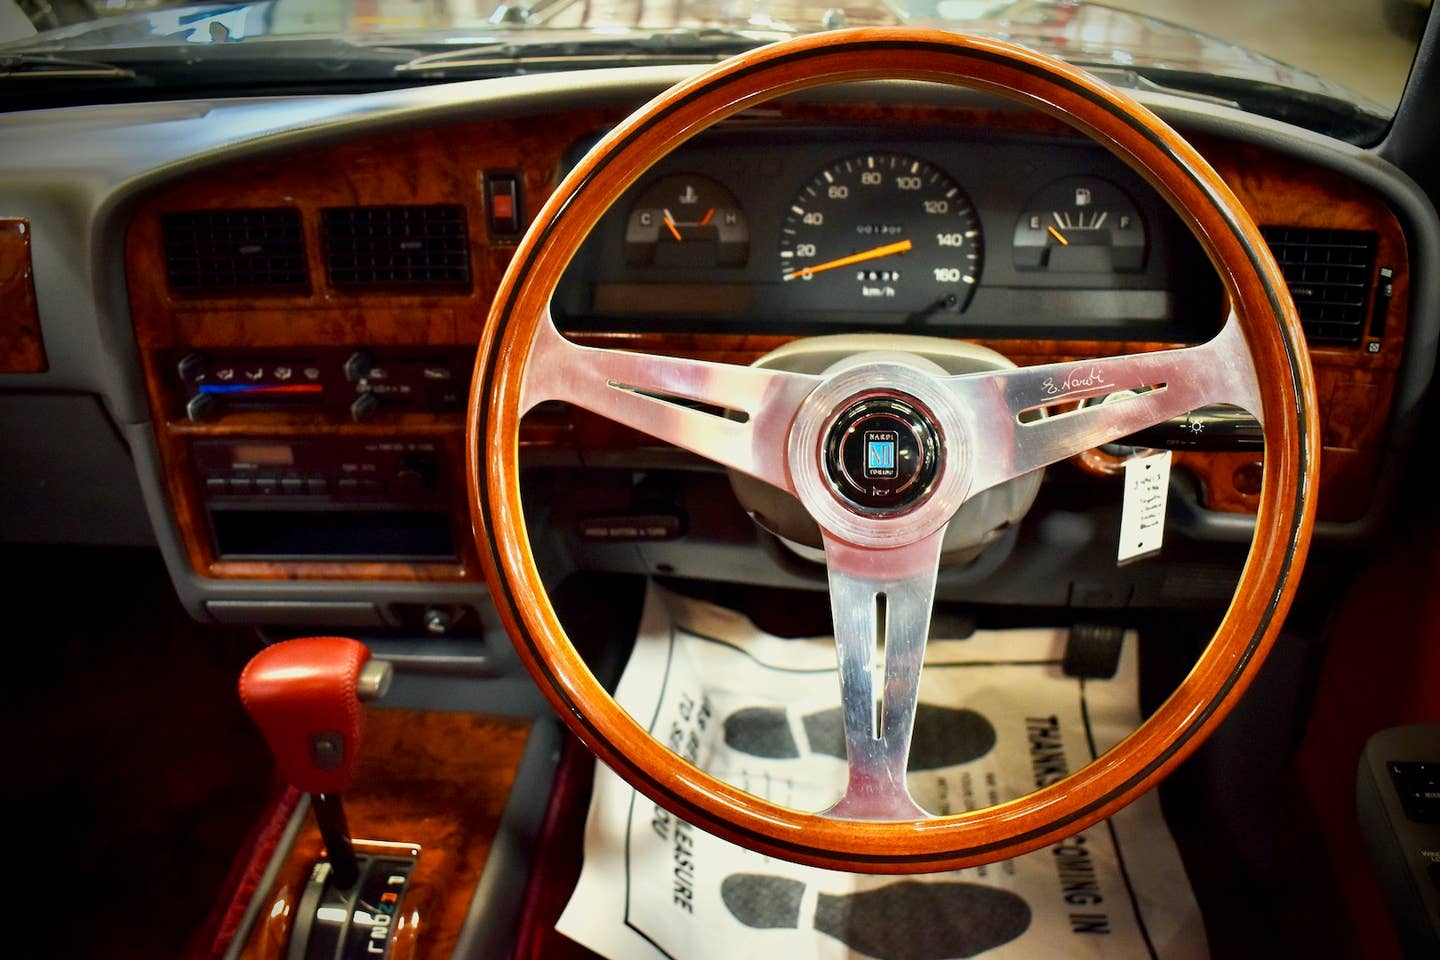 1996 Toyota Classic steering wheel and instrument cluster